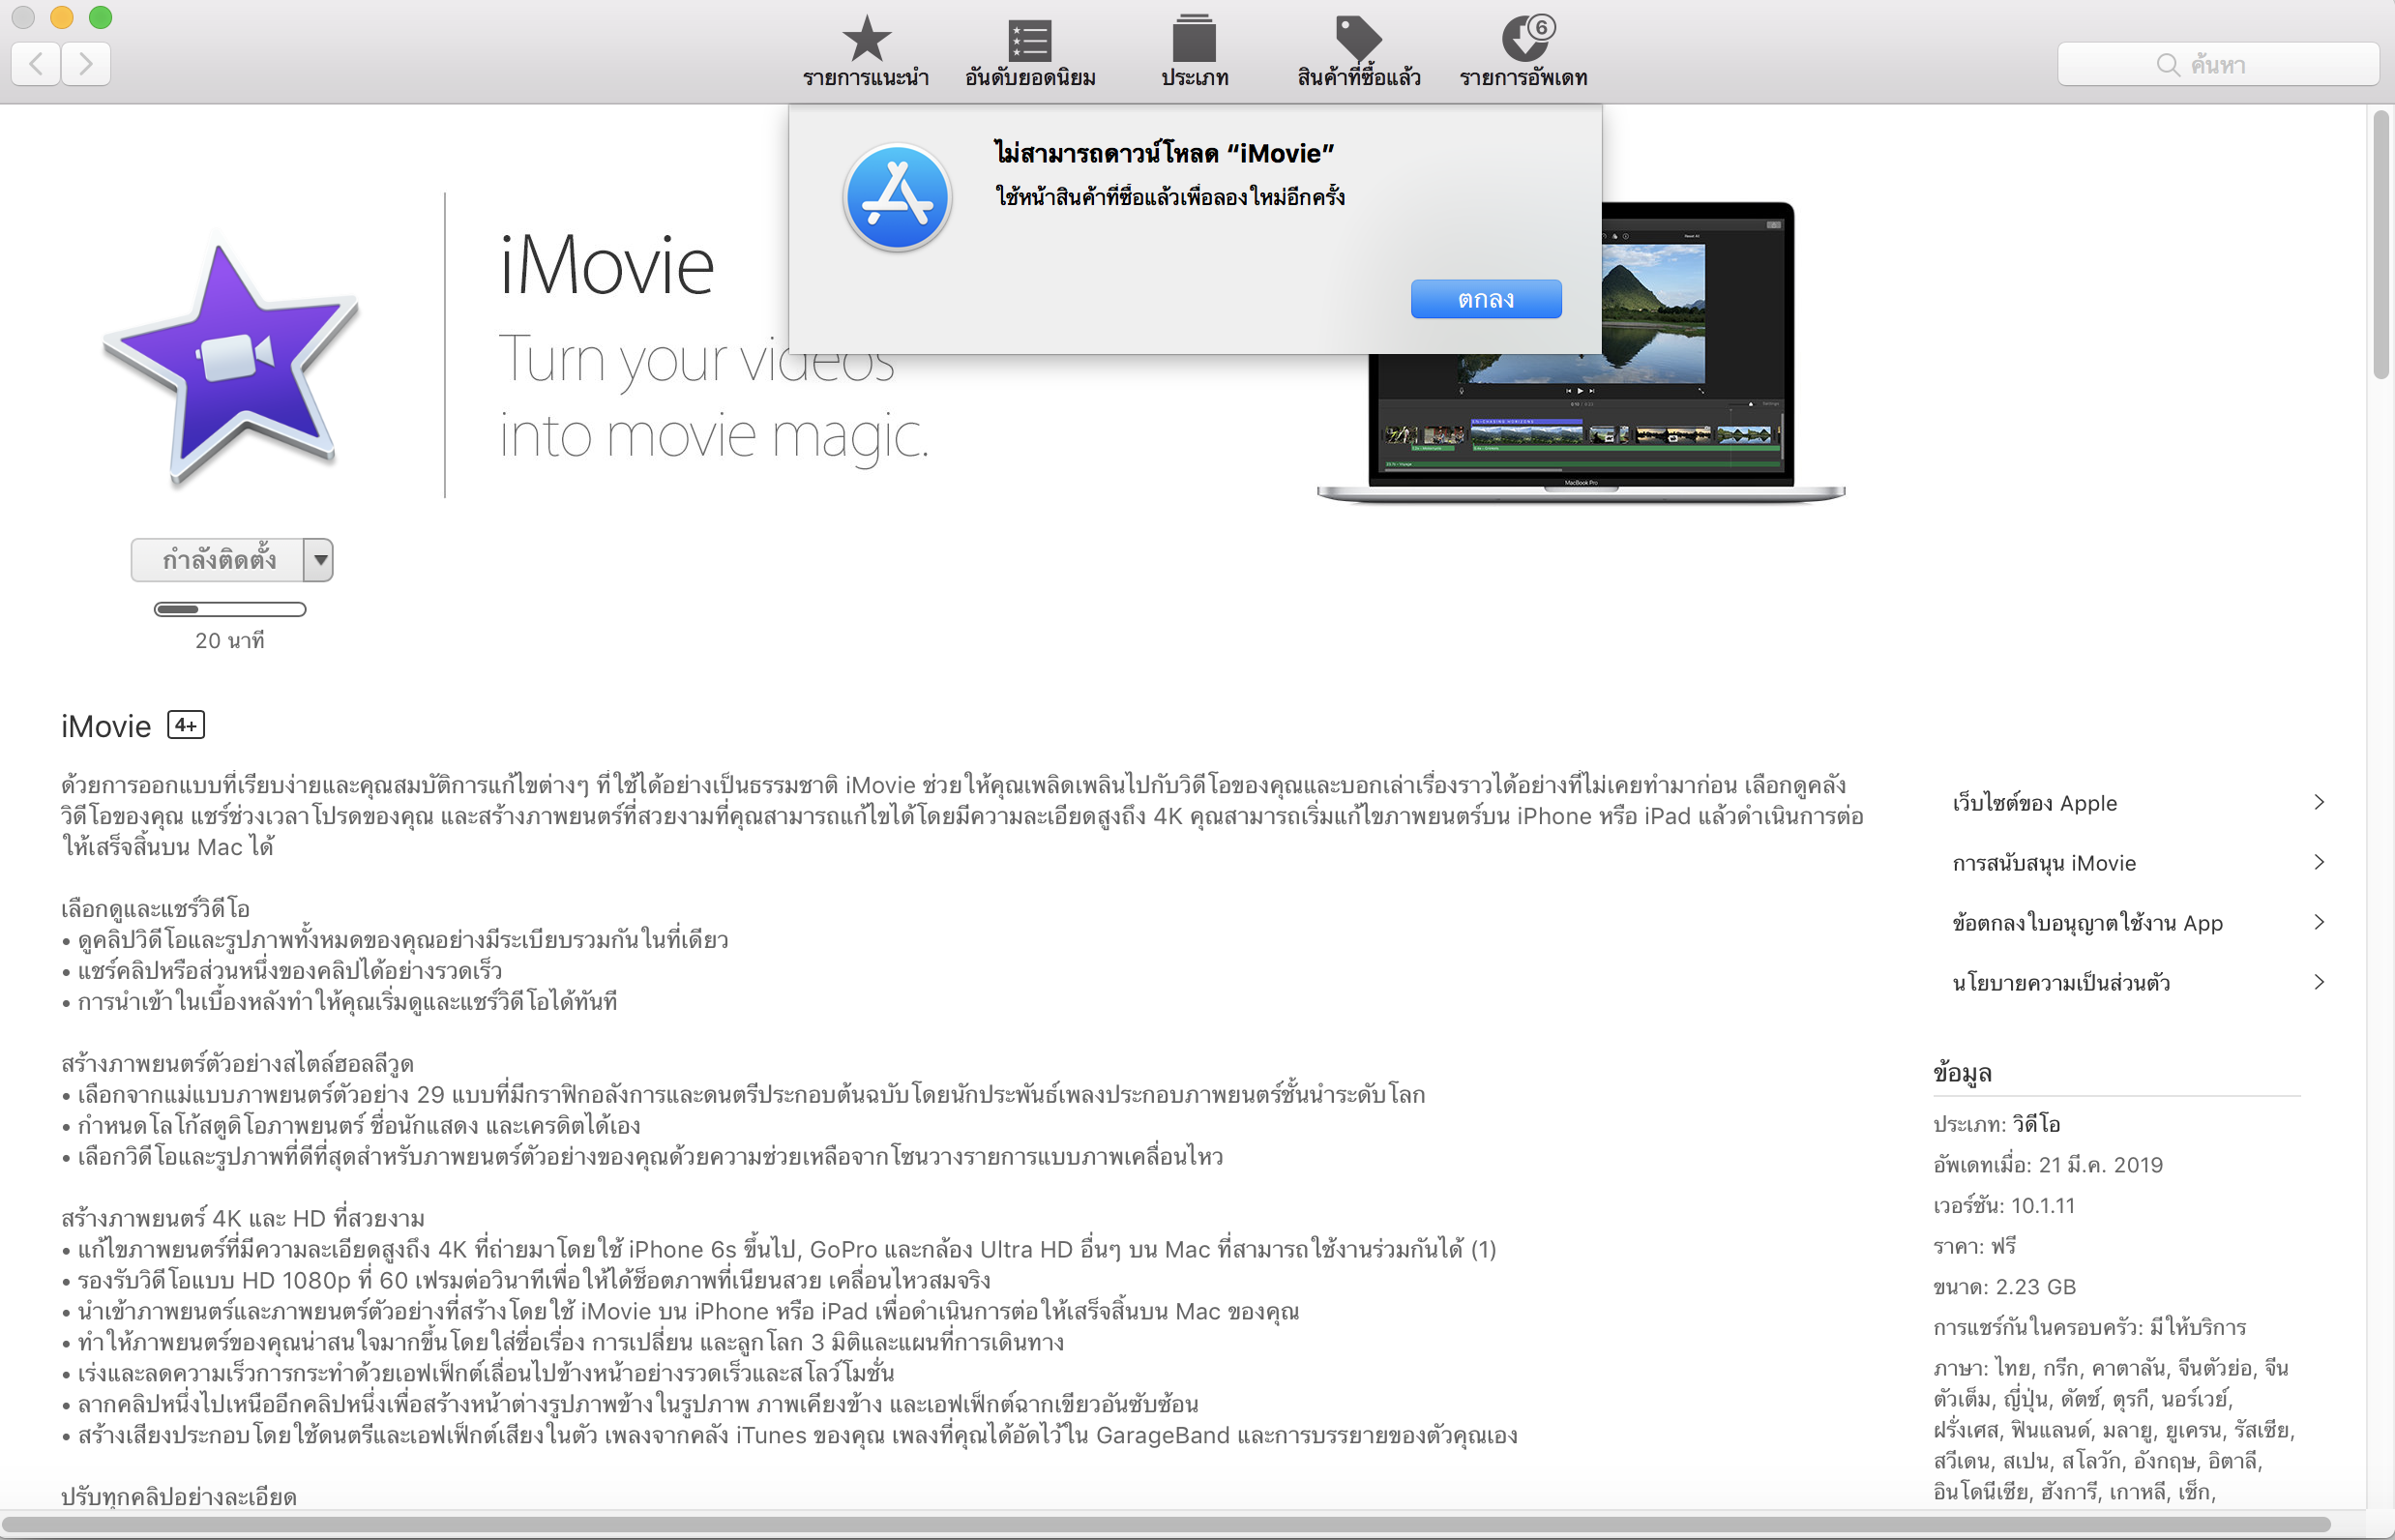 i cant download imovie on my mac